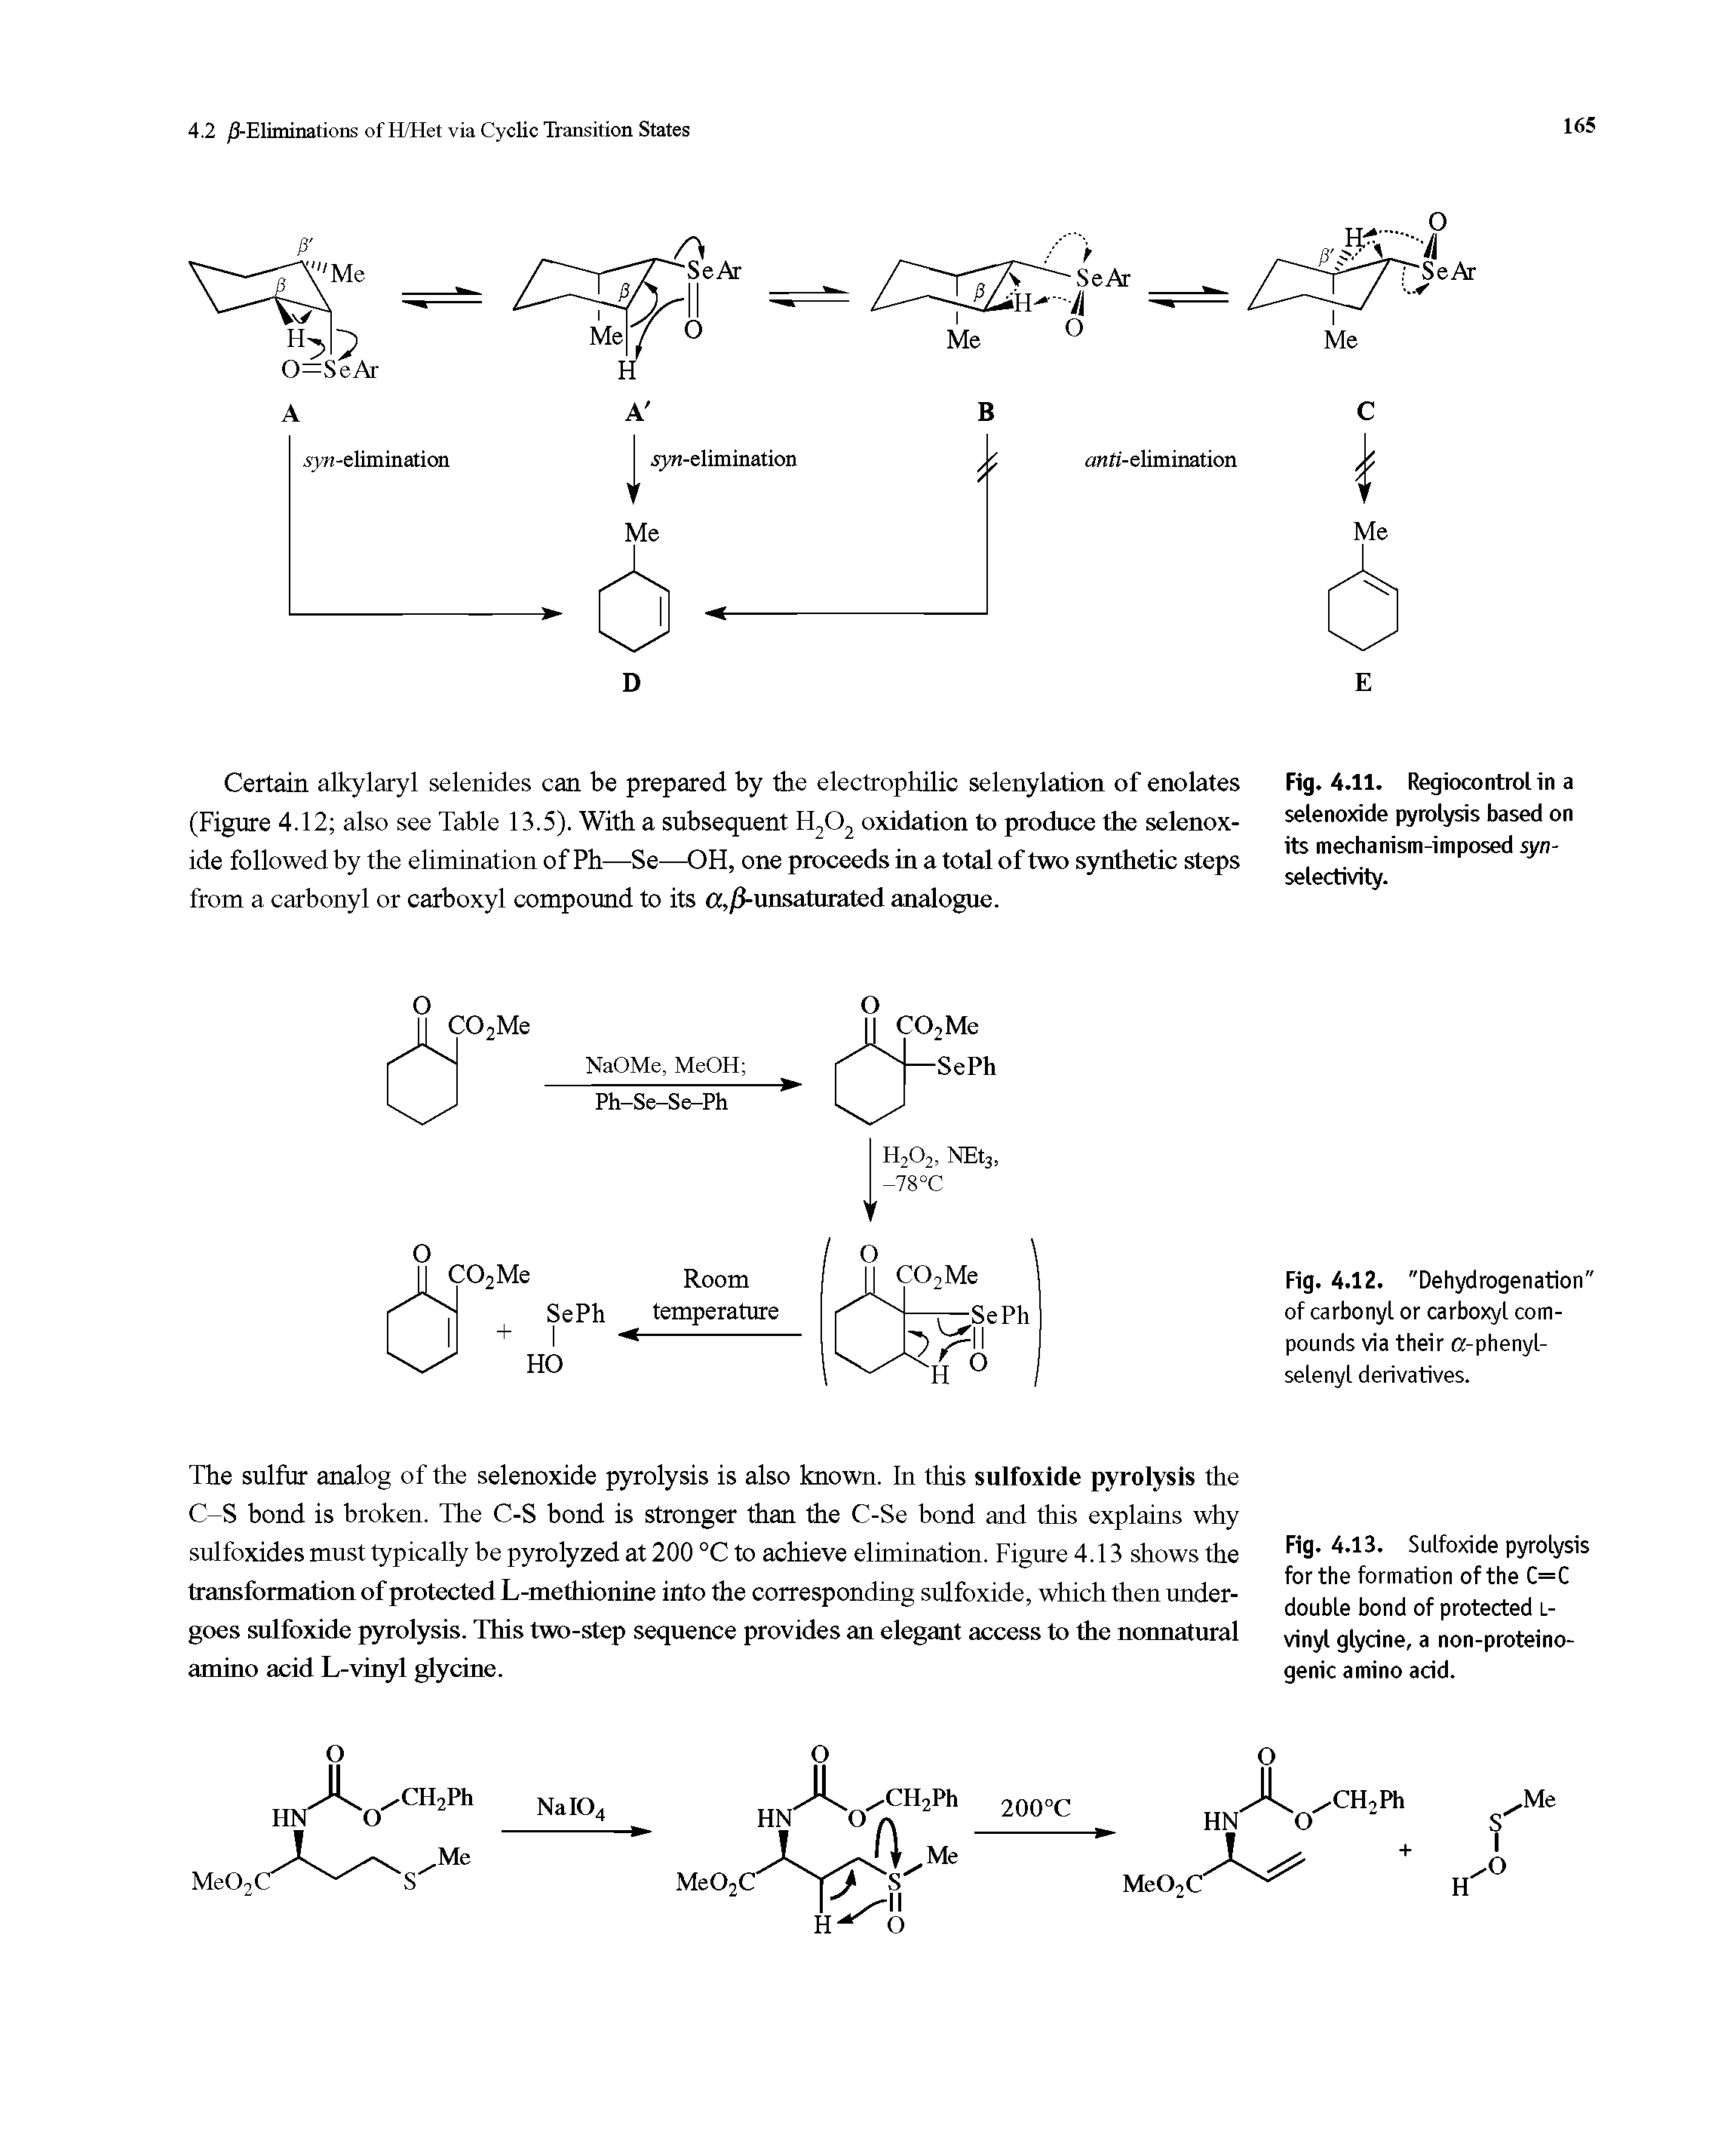 Fig. 4.12. "Dehydrogenation" of carbonyl or carboxyl compounds via their a-phenyl-selenyl derivatives.